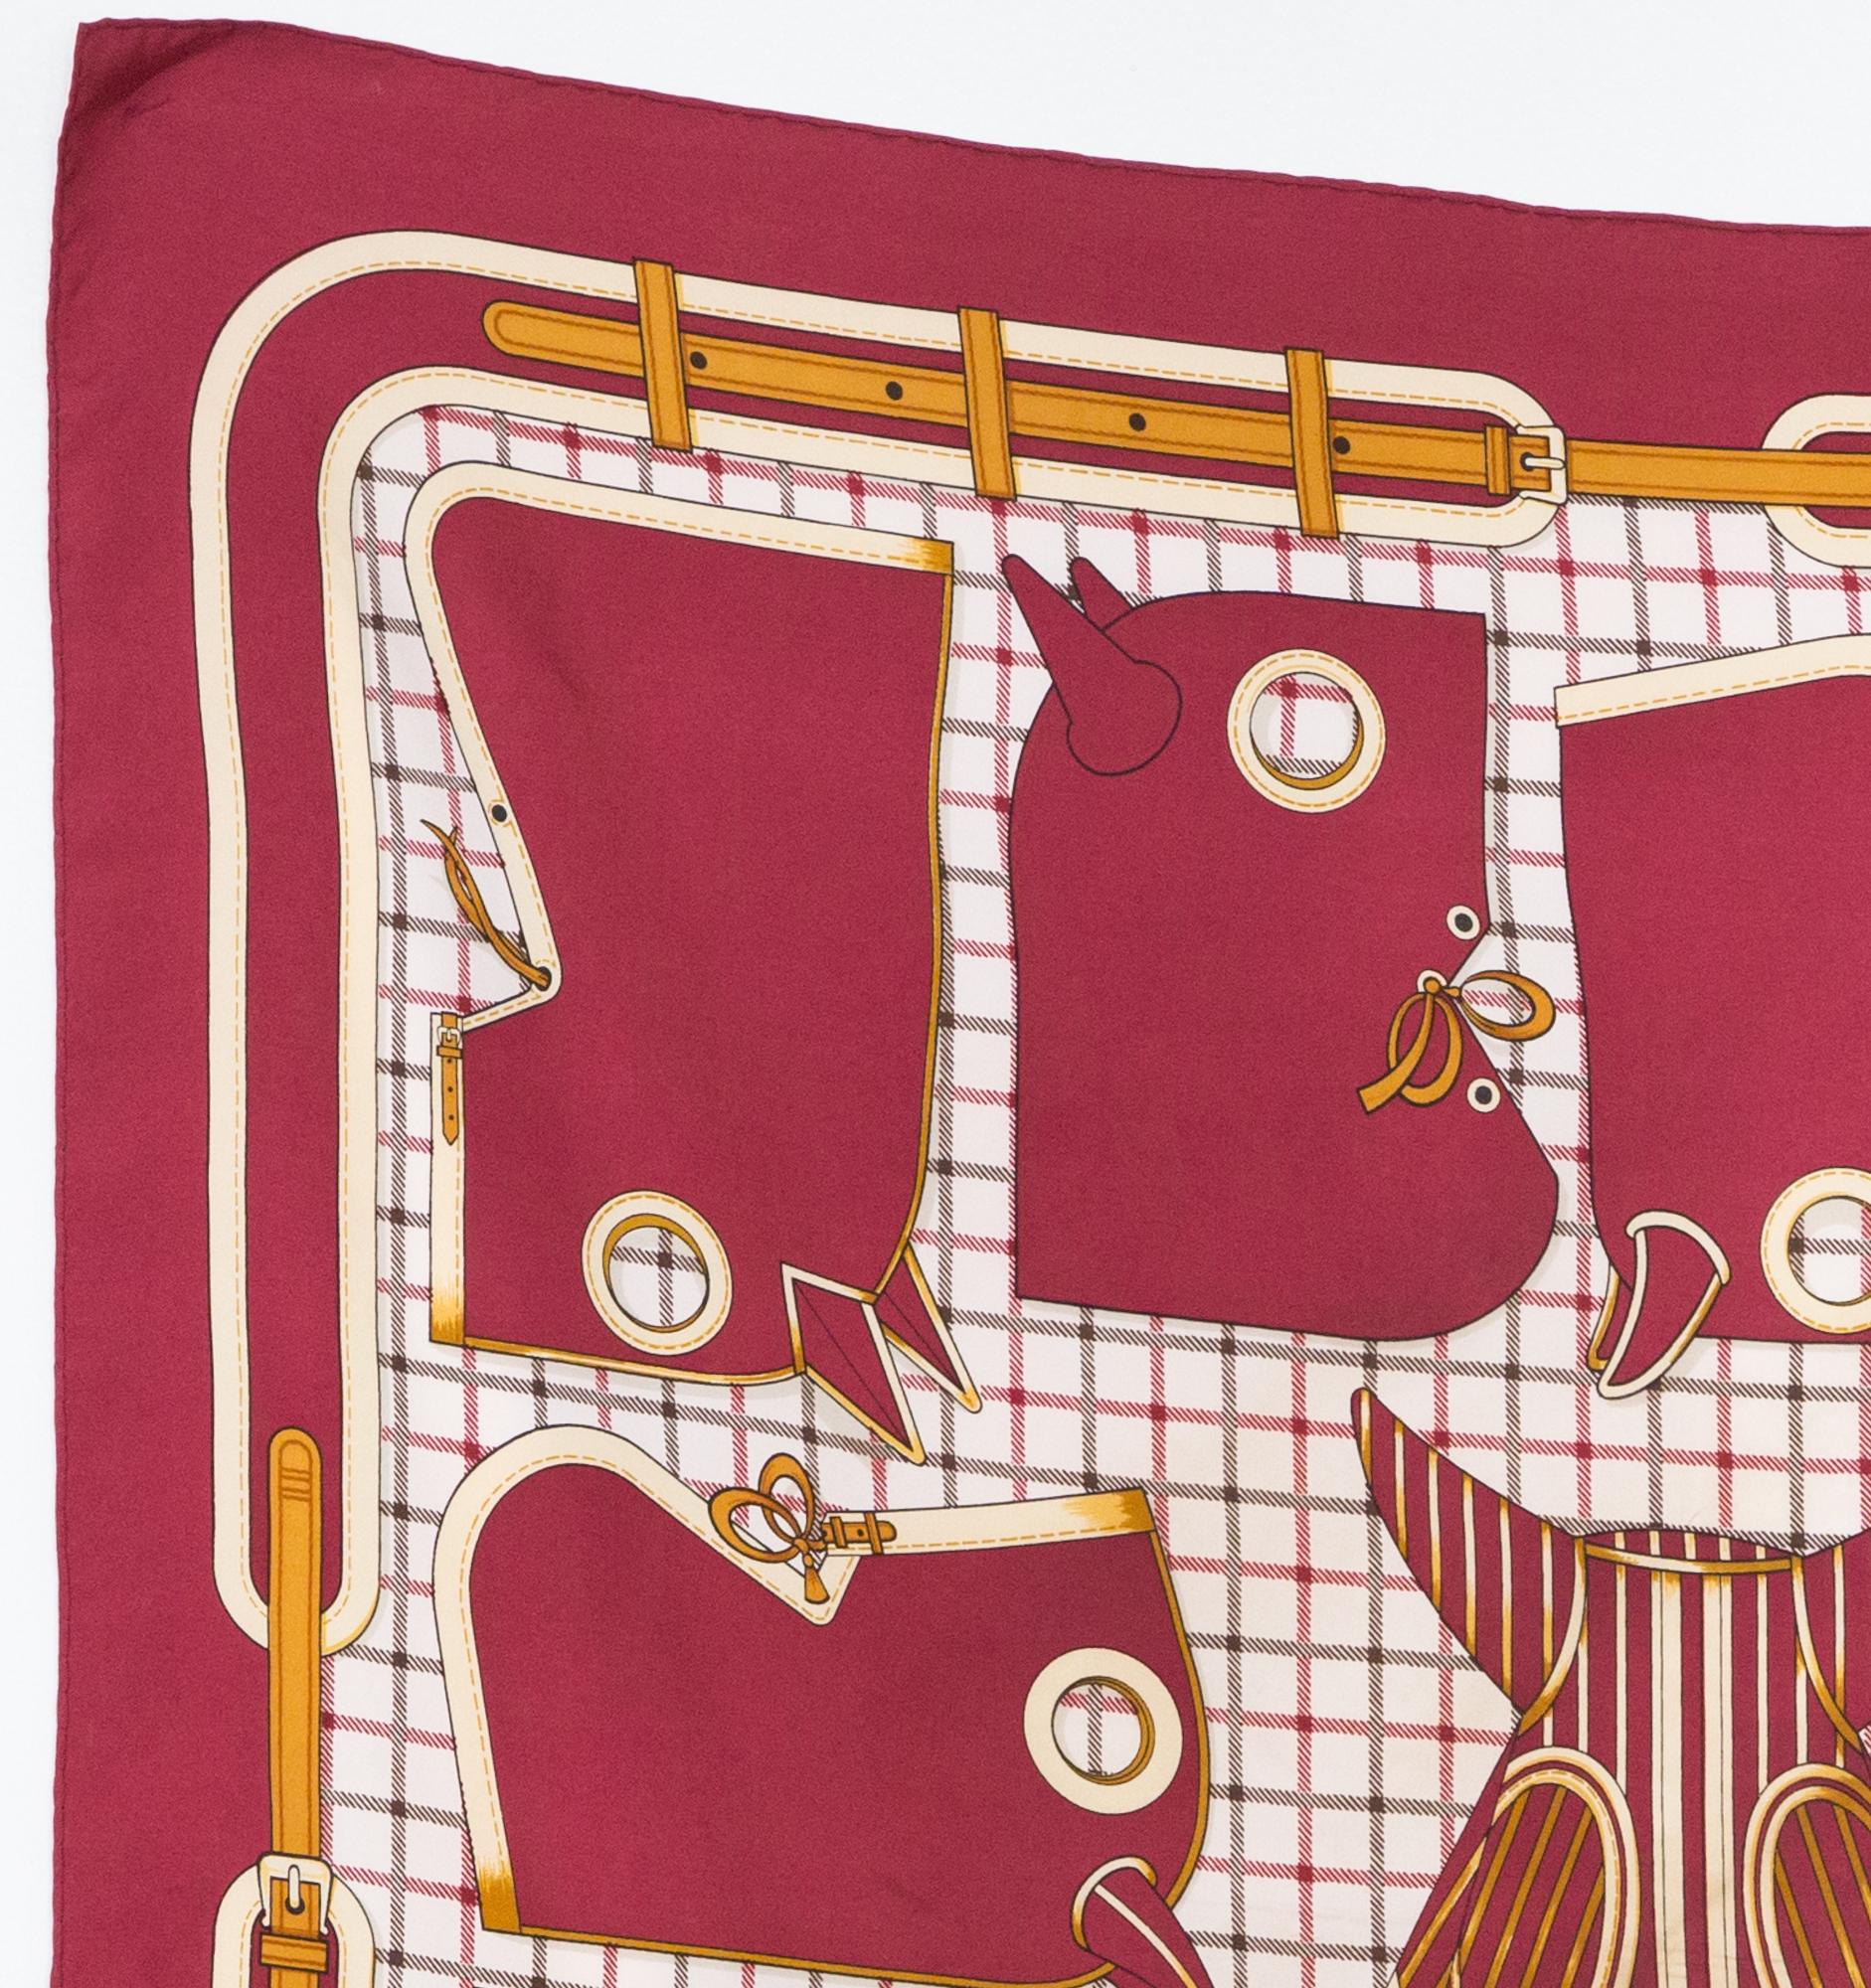 1974 Hermes silk scarf Camails designed by Francoise de la Perriere featuring a red border and a Hermès signature. 
Camails was created in 1948.
In good vintage condition. Made in France.
35,4in. (90cm)  X 35,4in. (90cm)
We guarantee you will